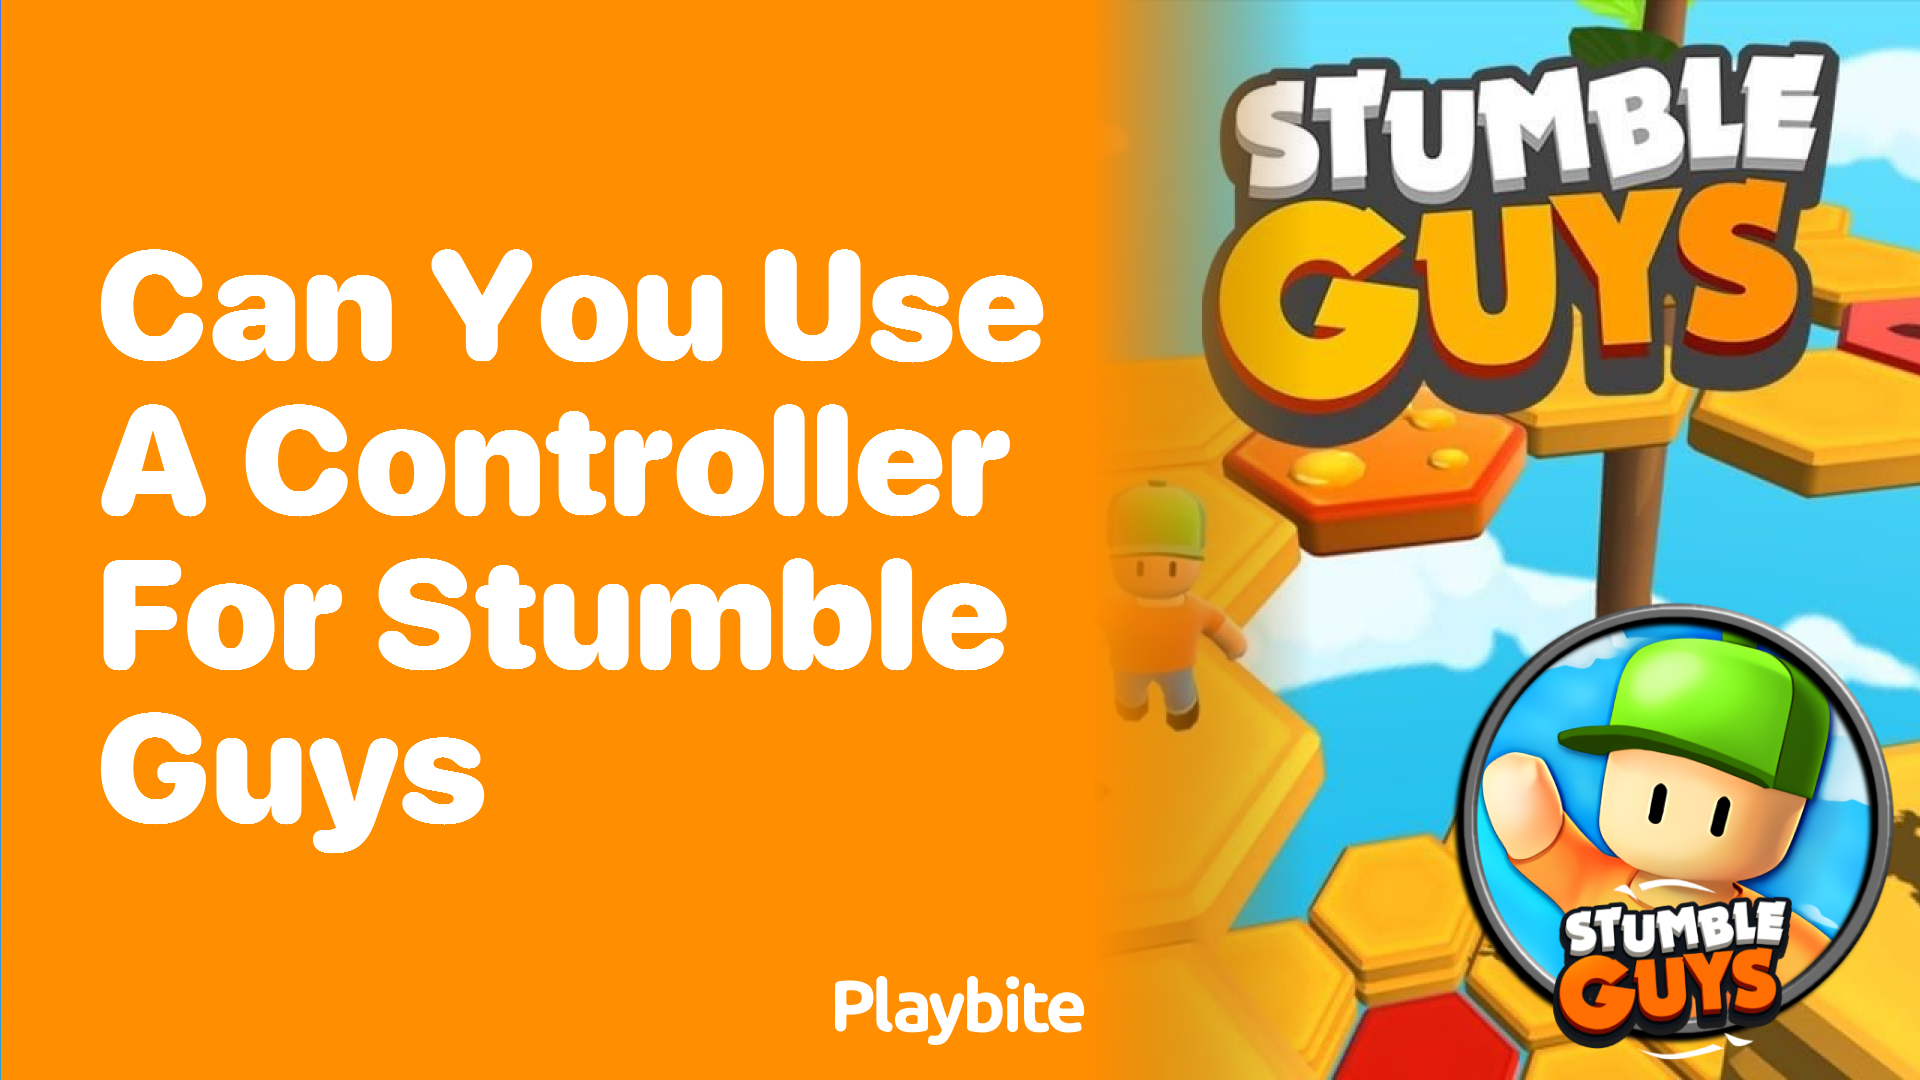 Can You Use a Controller for Stumble Guys?